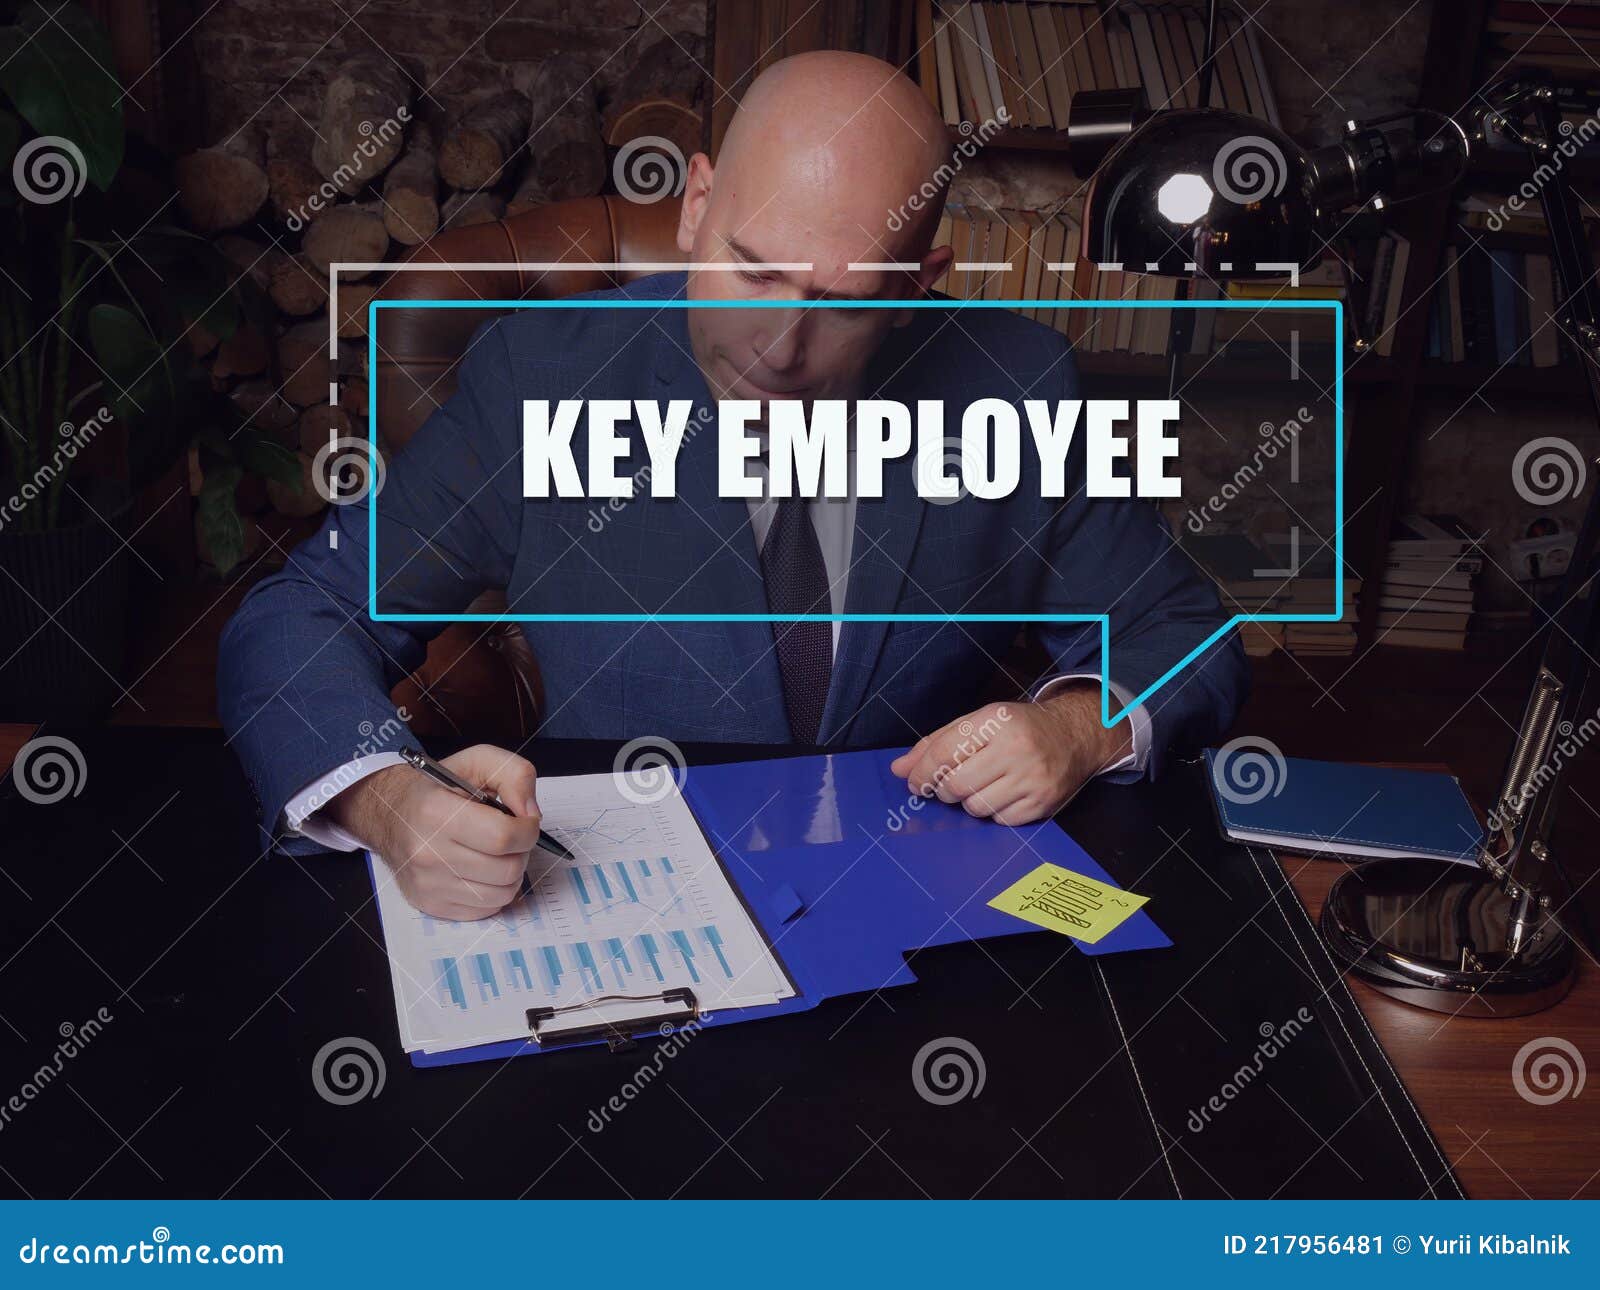 key employee text in footnote block. merchant checking financial report aÃÂ key employeeÃÂ is anÃÂ employeeÃÂ with major ownership